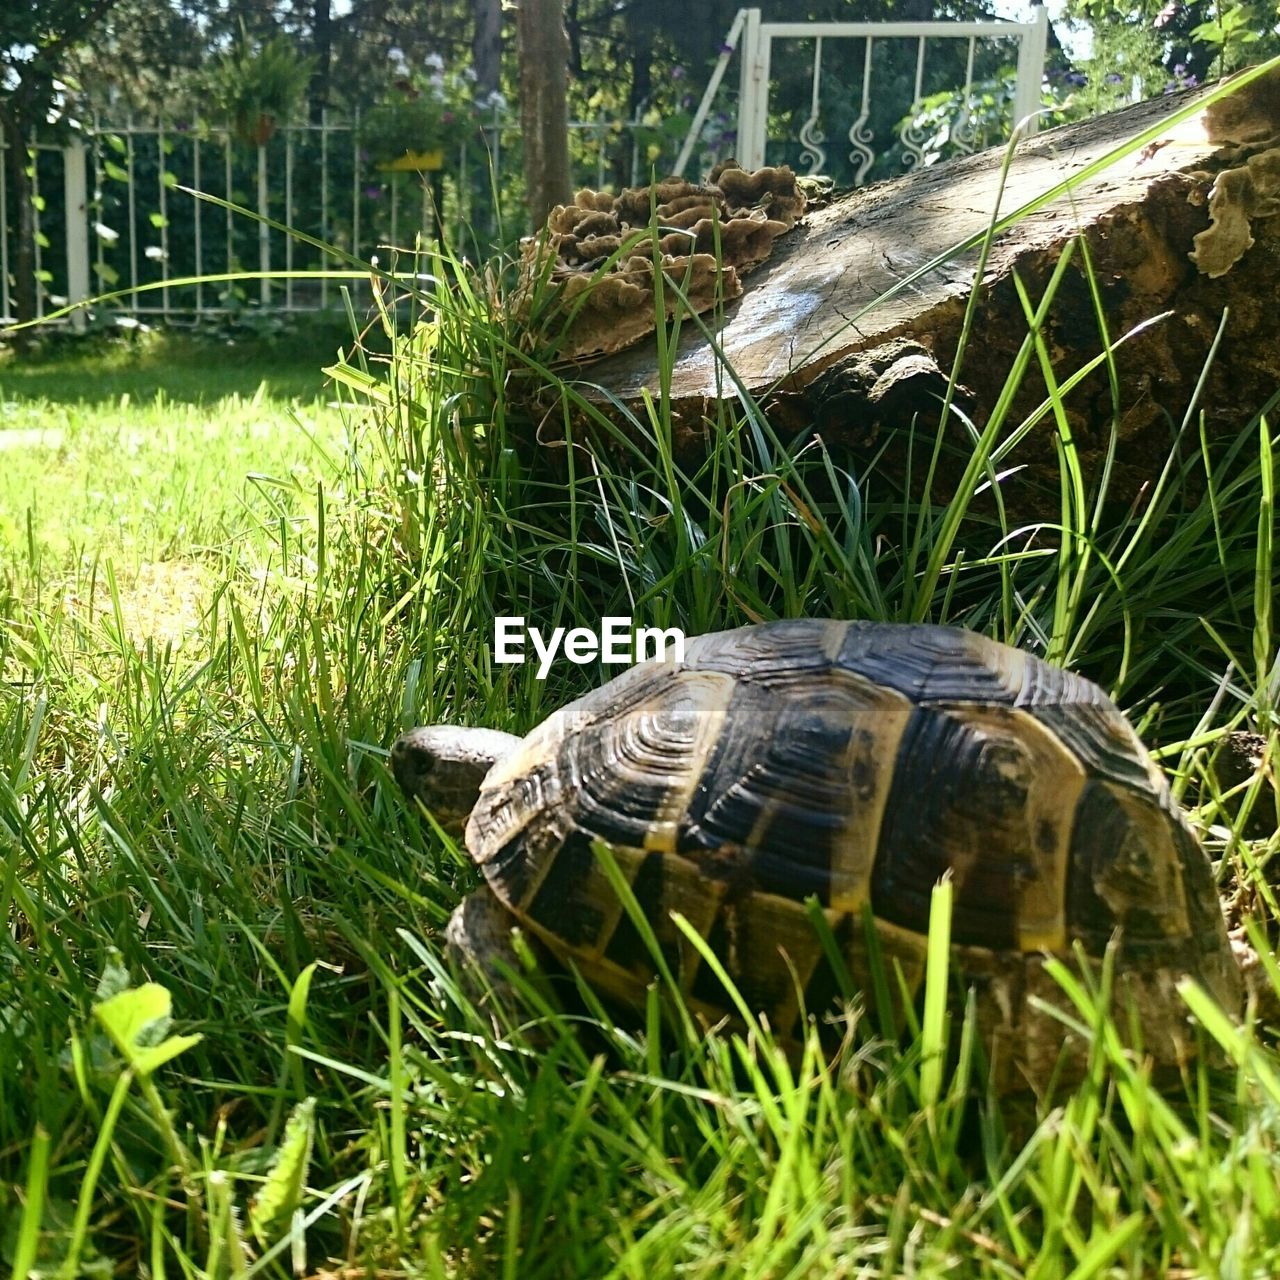 CLOSE-UP OF TORTOISE IN GRASS